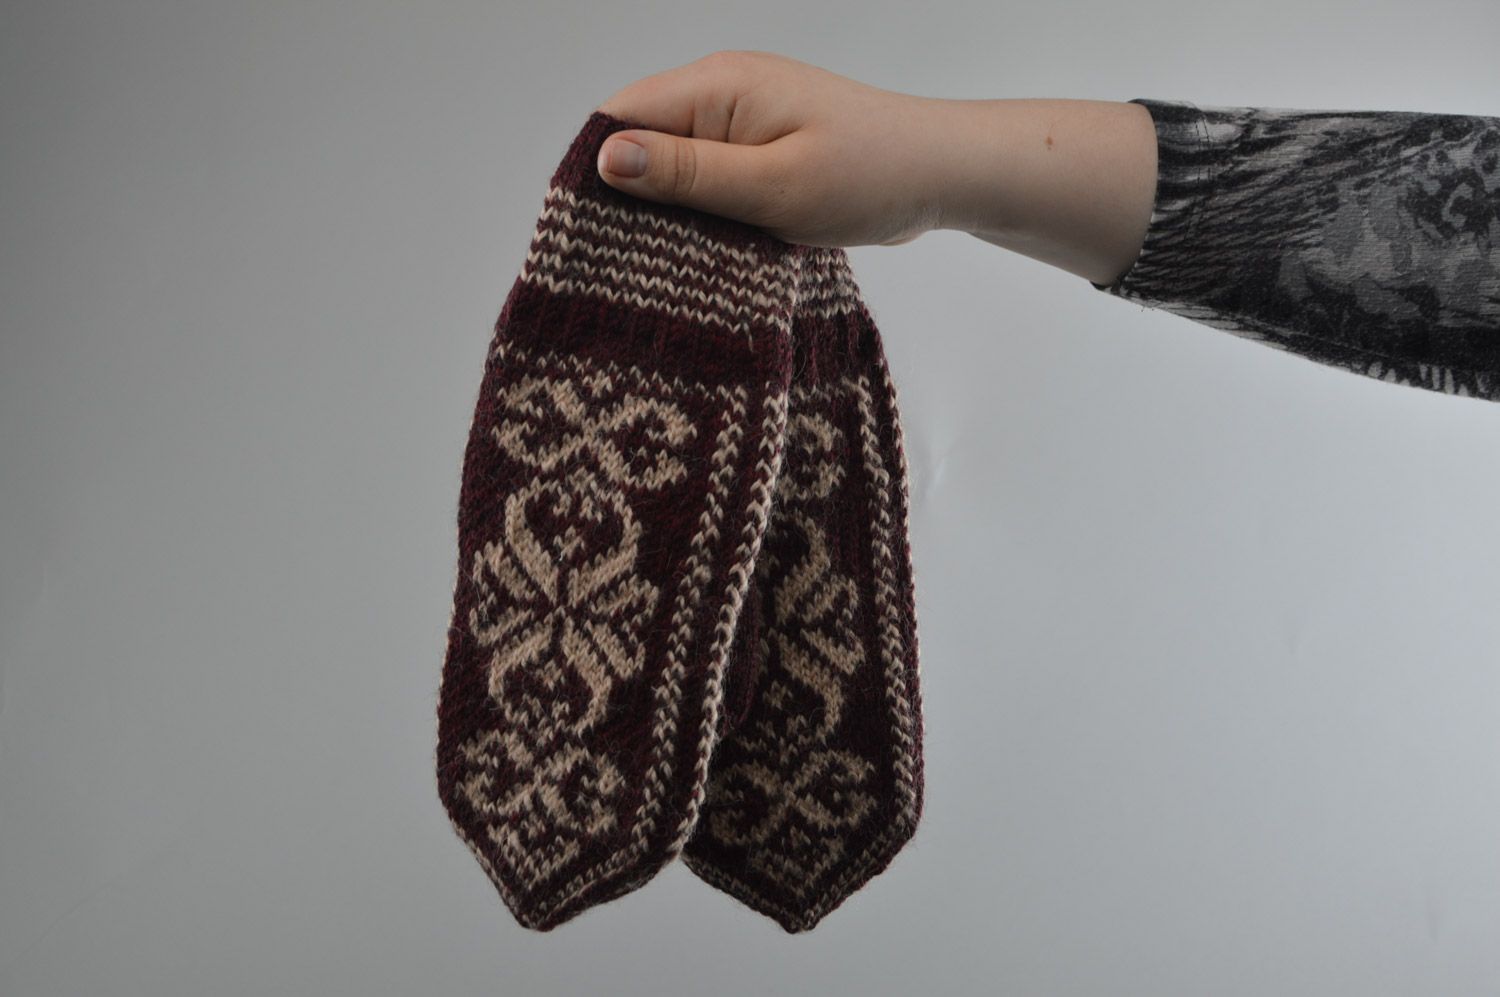 Homemade warm winter knit woolen mittens with ornaments in brown color palette photo 3